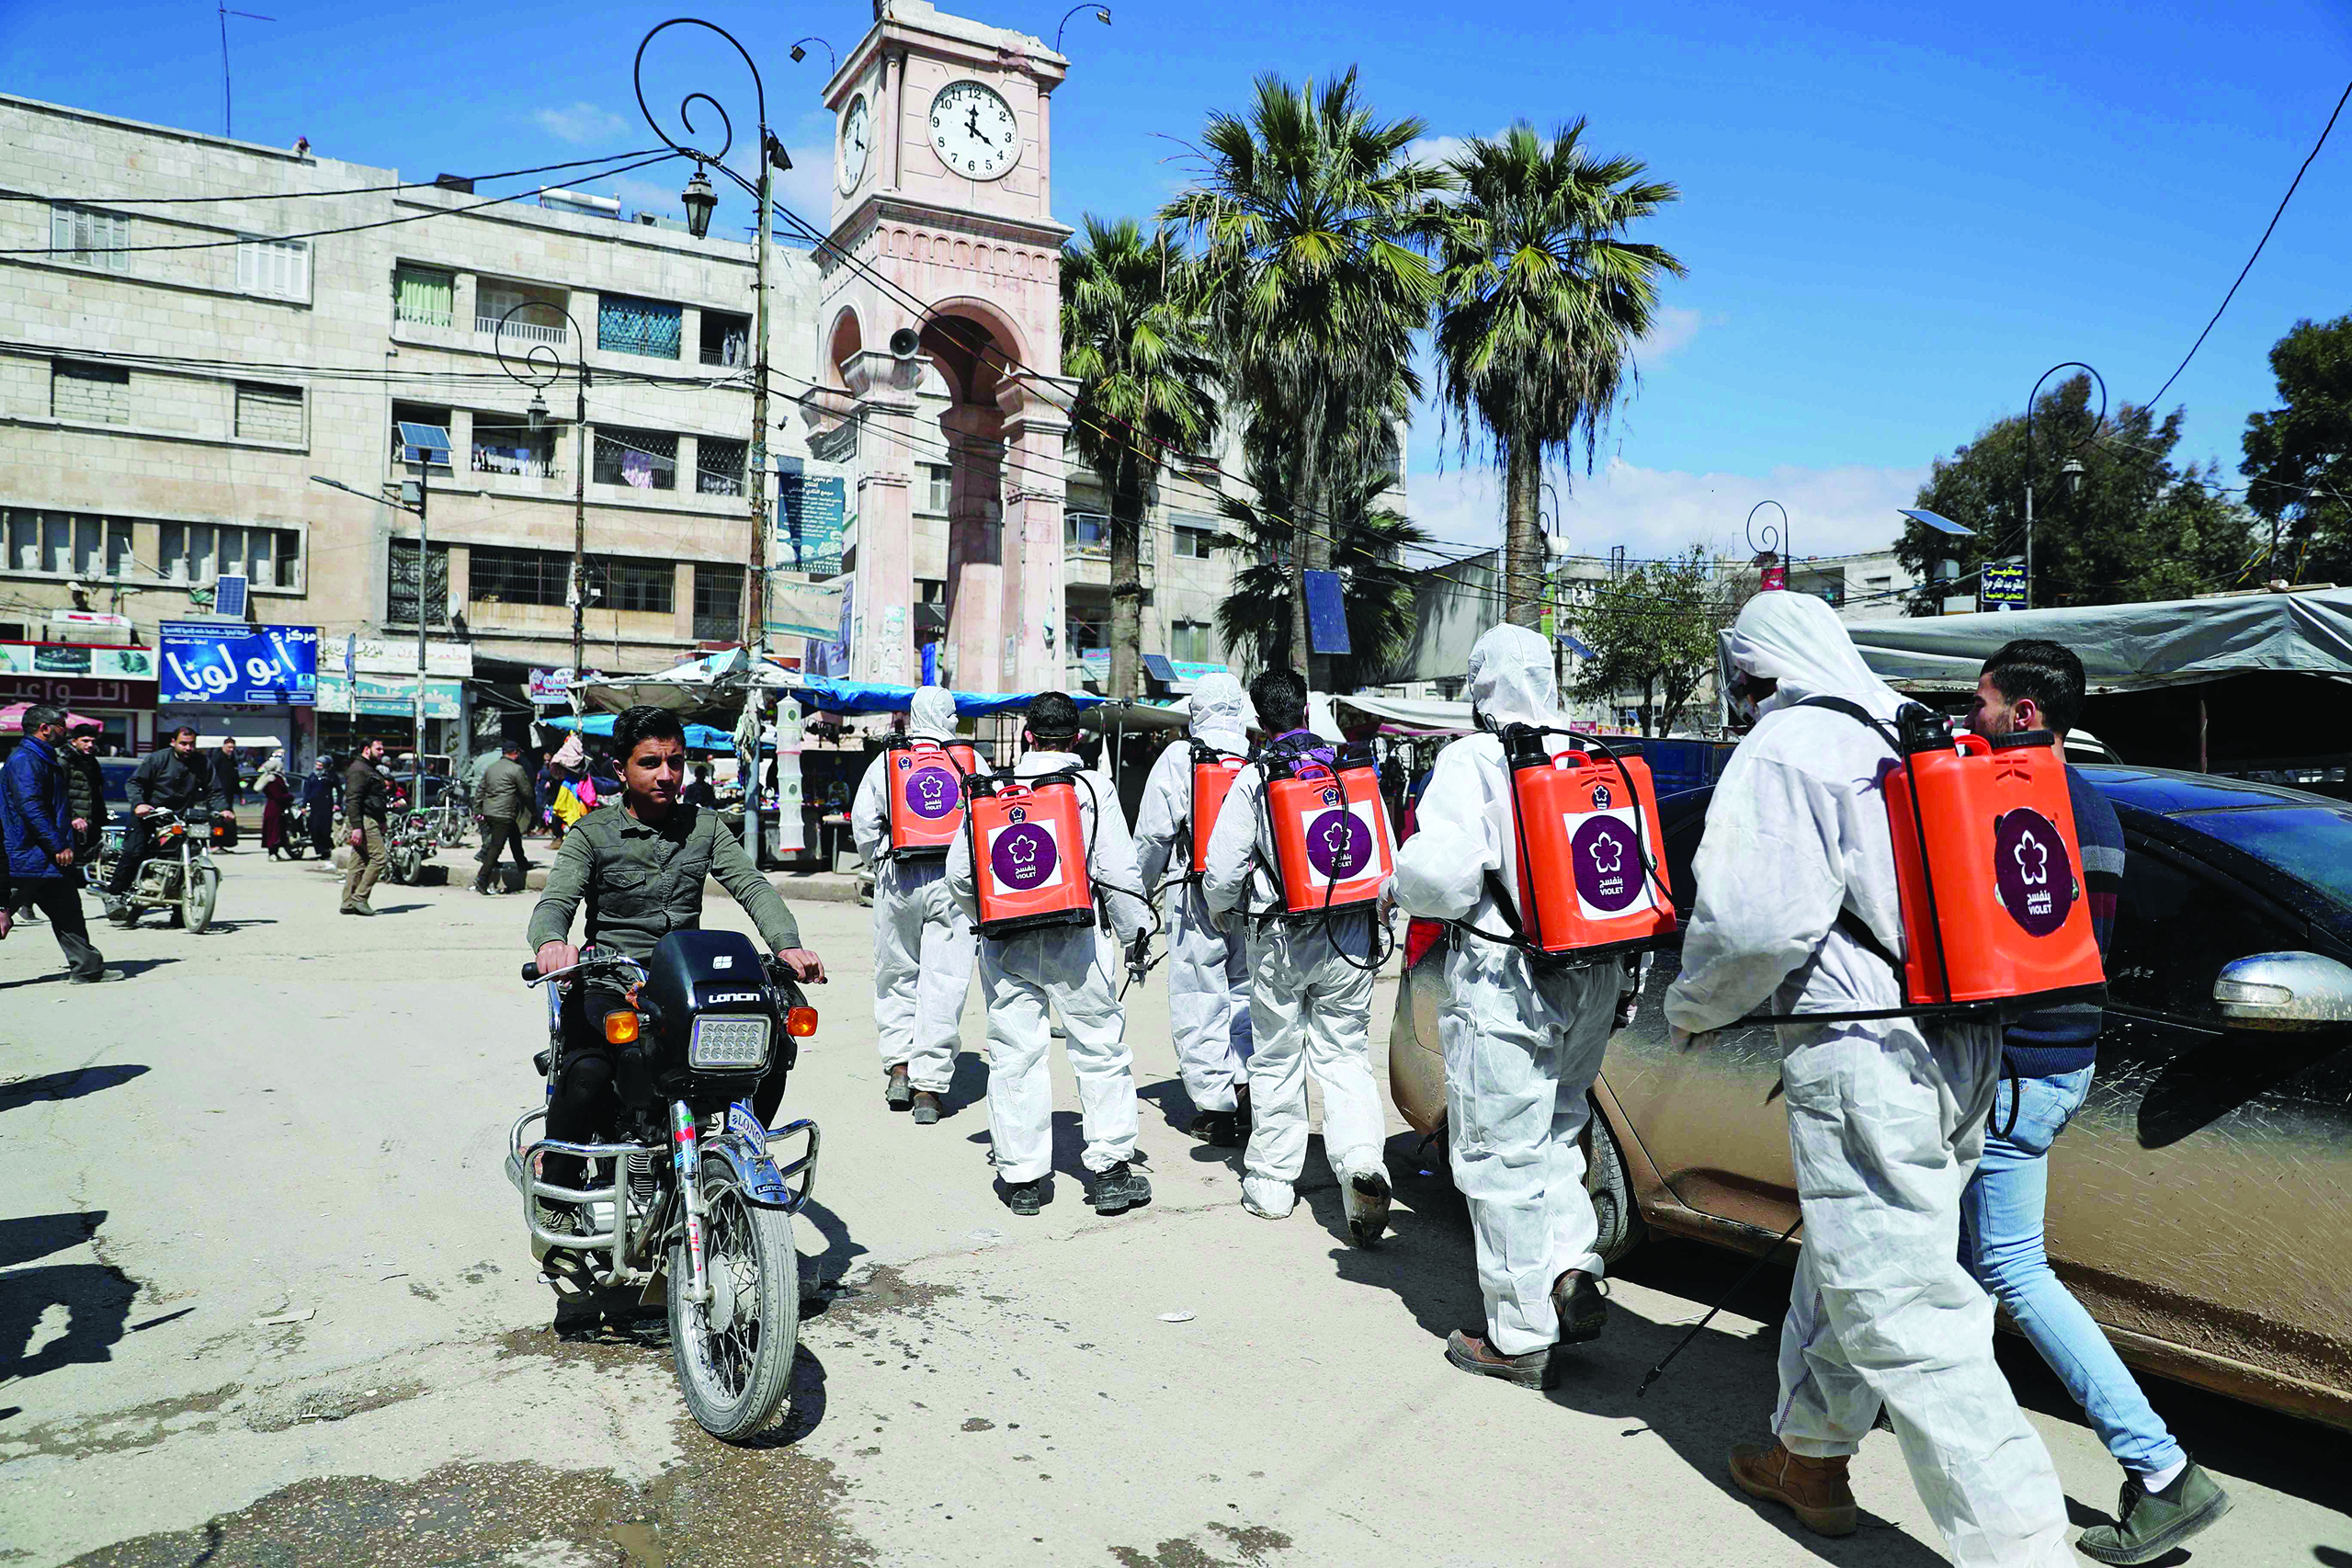 TOPSHOT - Members of the Syrian Violet NGO disinfect the streets of Syria's northwestern Idlib city on March 21, 2020 as a preventive measure against the spread of the coronavirus COVID-19. (Photo by Omar HAJ KADOUR / AFP)